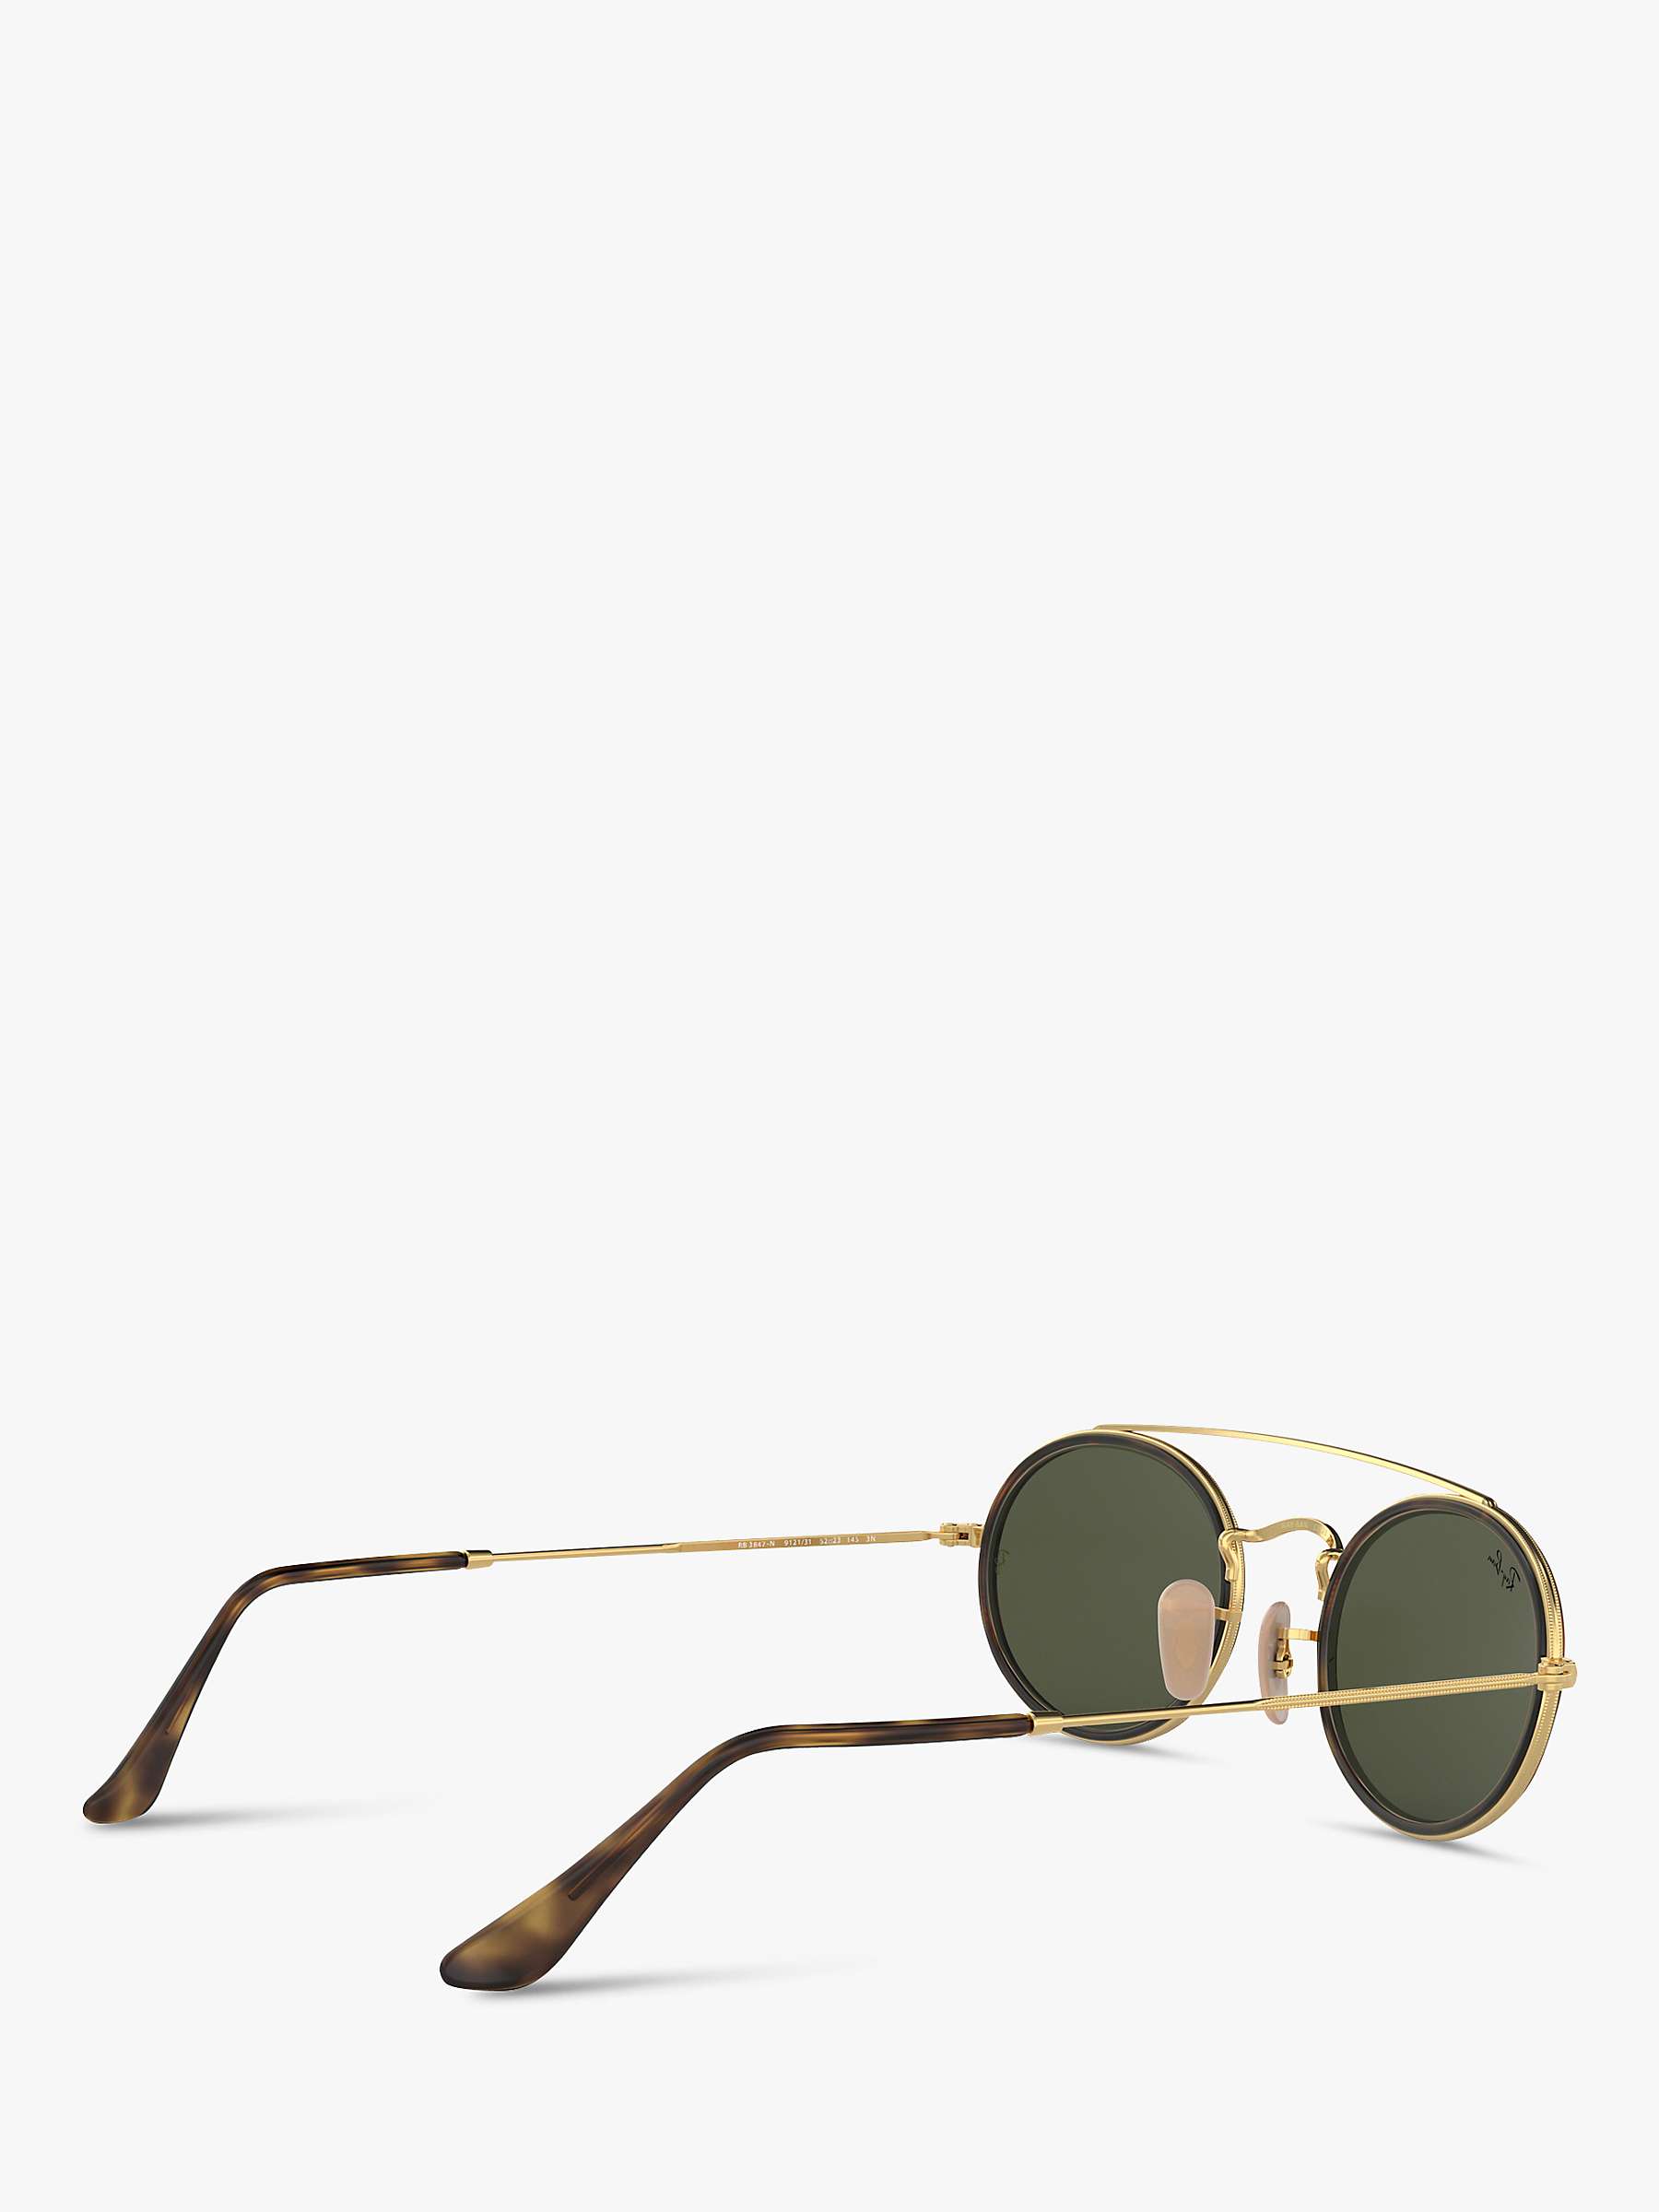 Buy Ray-Ban RB3847N Women's Oval Sunglasses Online at johnlewis.com